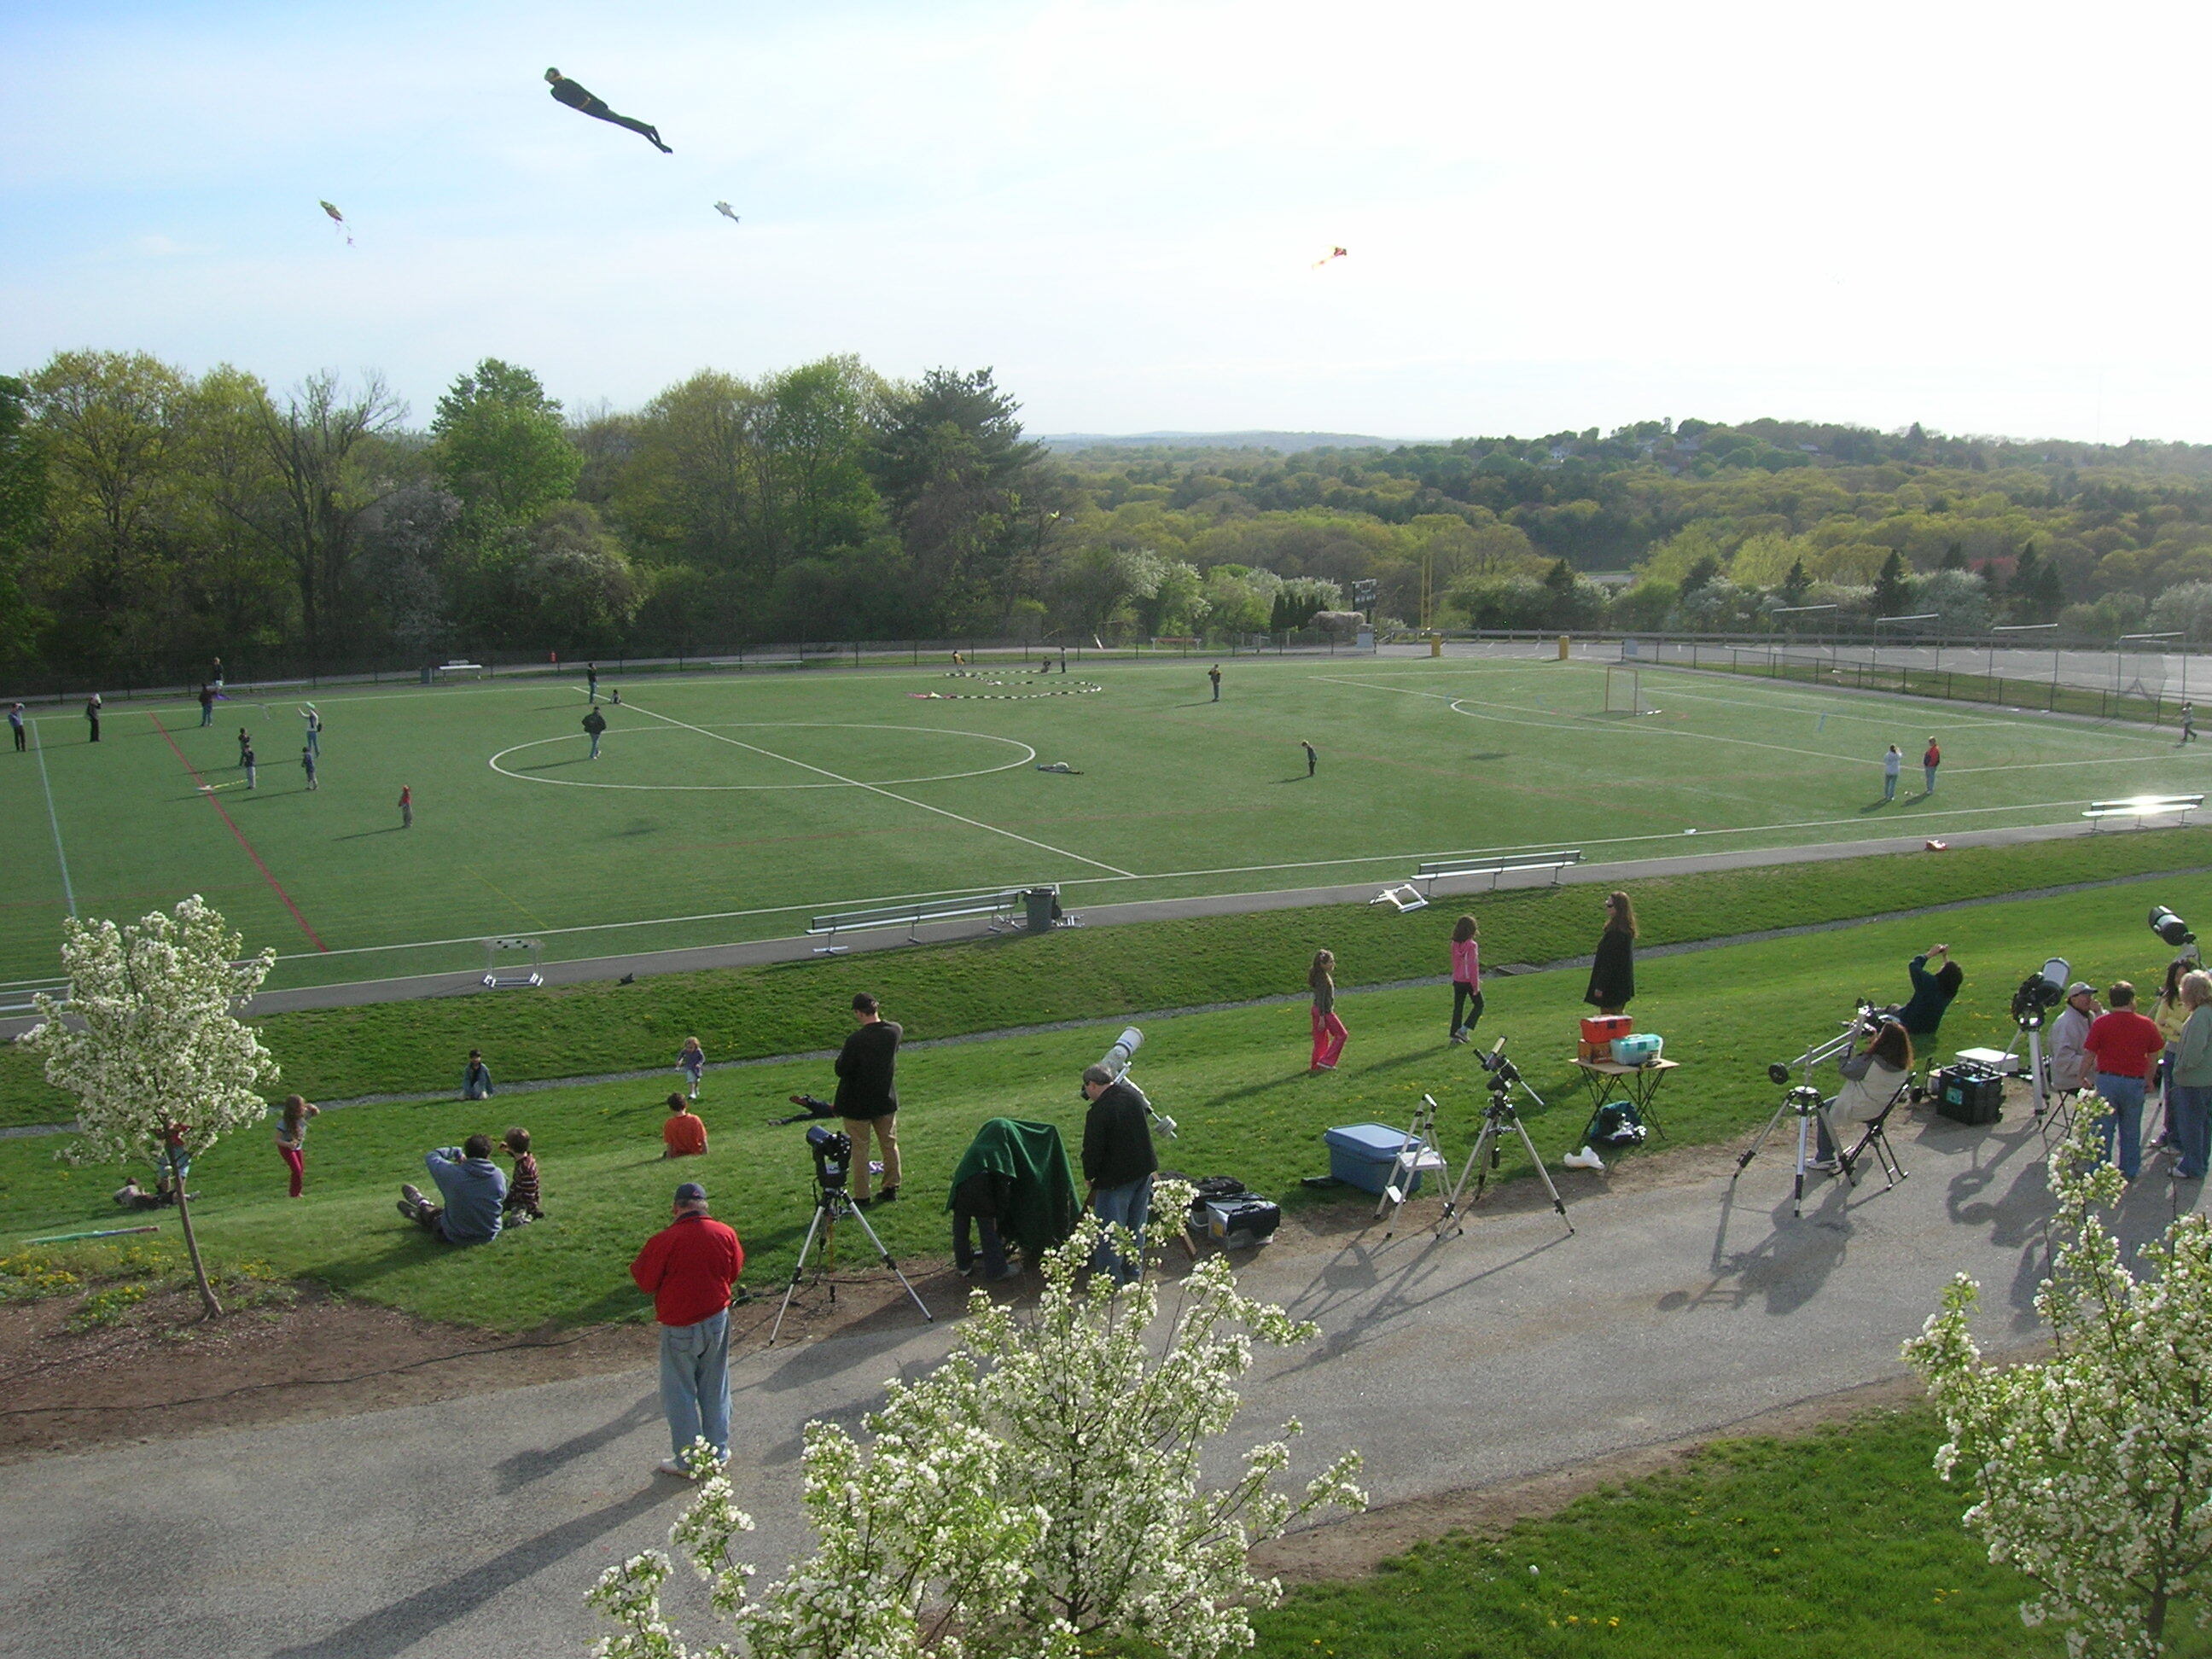 People stand scattered across a large soccer field flying kites.